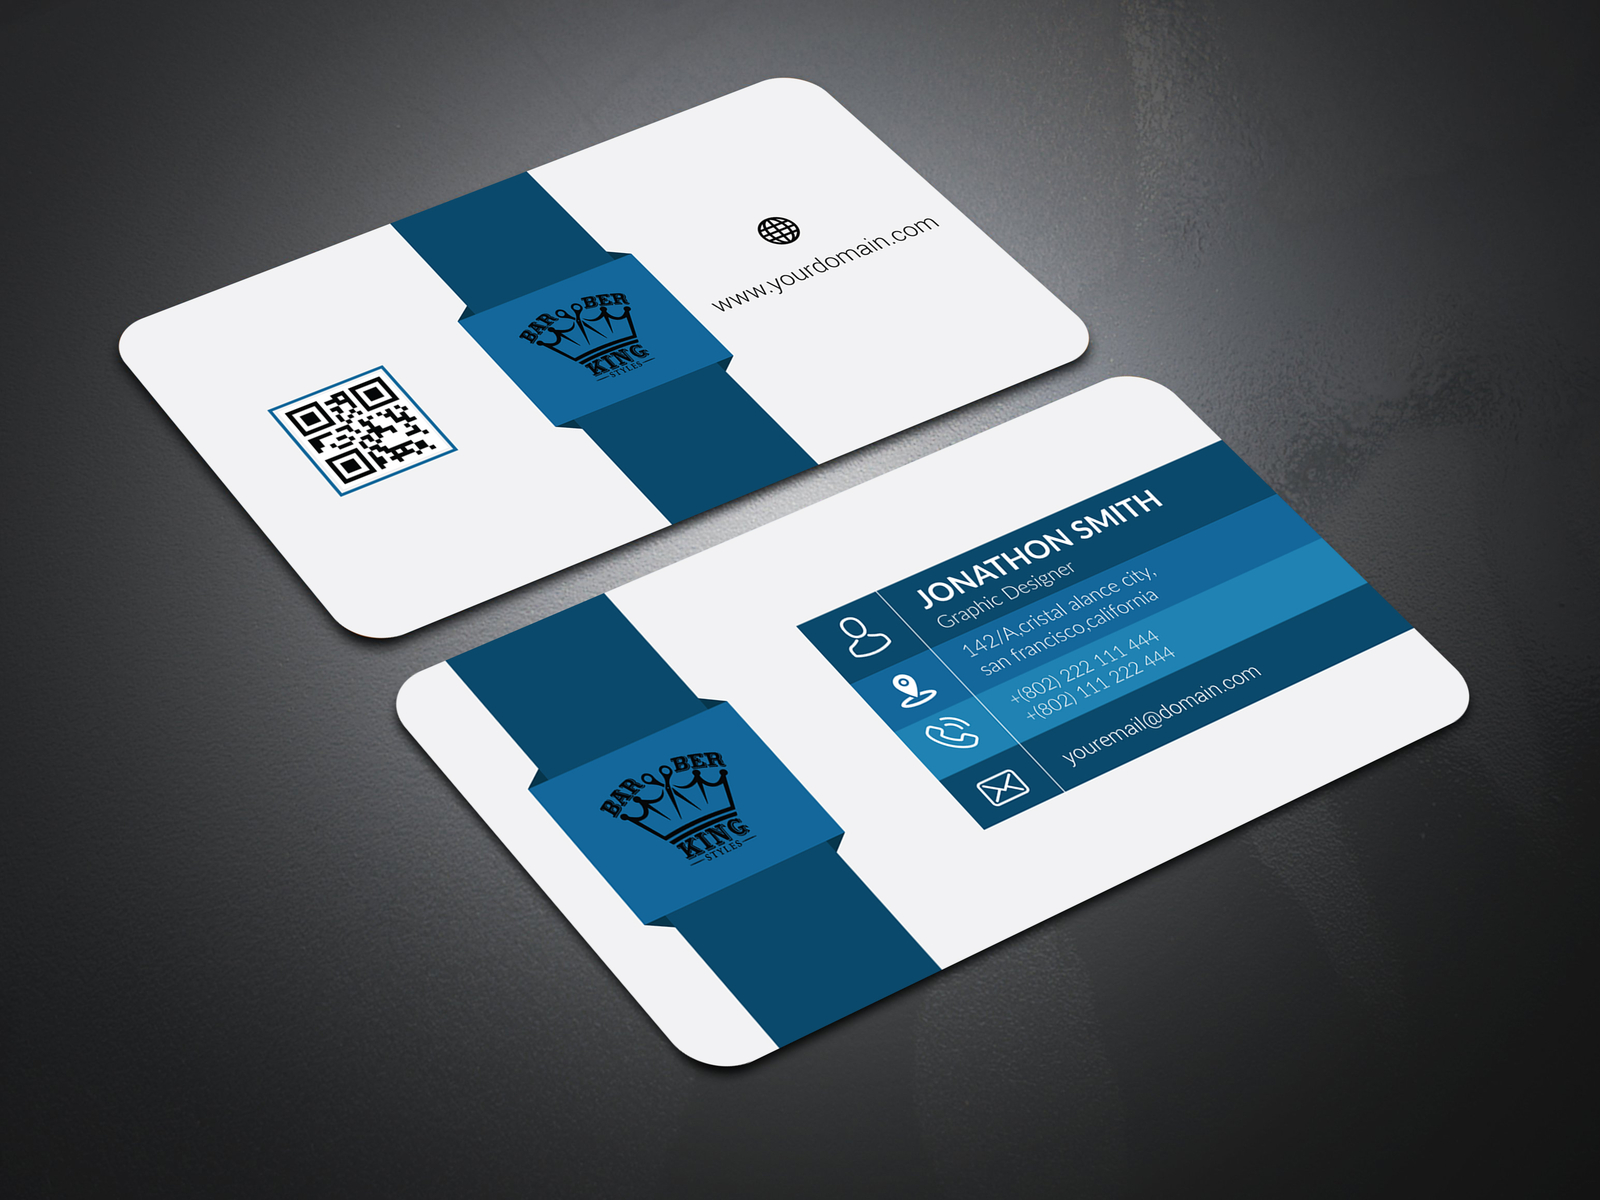 Sample Business Cards : 13+ Sample Business Card Templates - PSD, Word, Pages ... : Our standard sample pack includes 12 different business card options, a variety of postcards, brochures, stationery, and more.